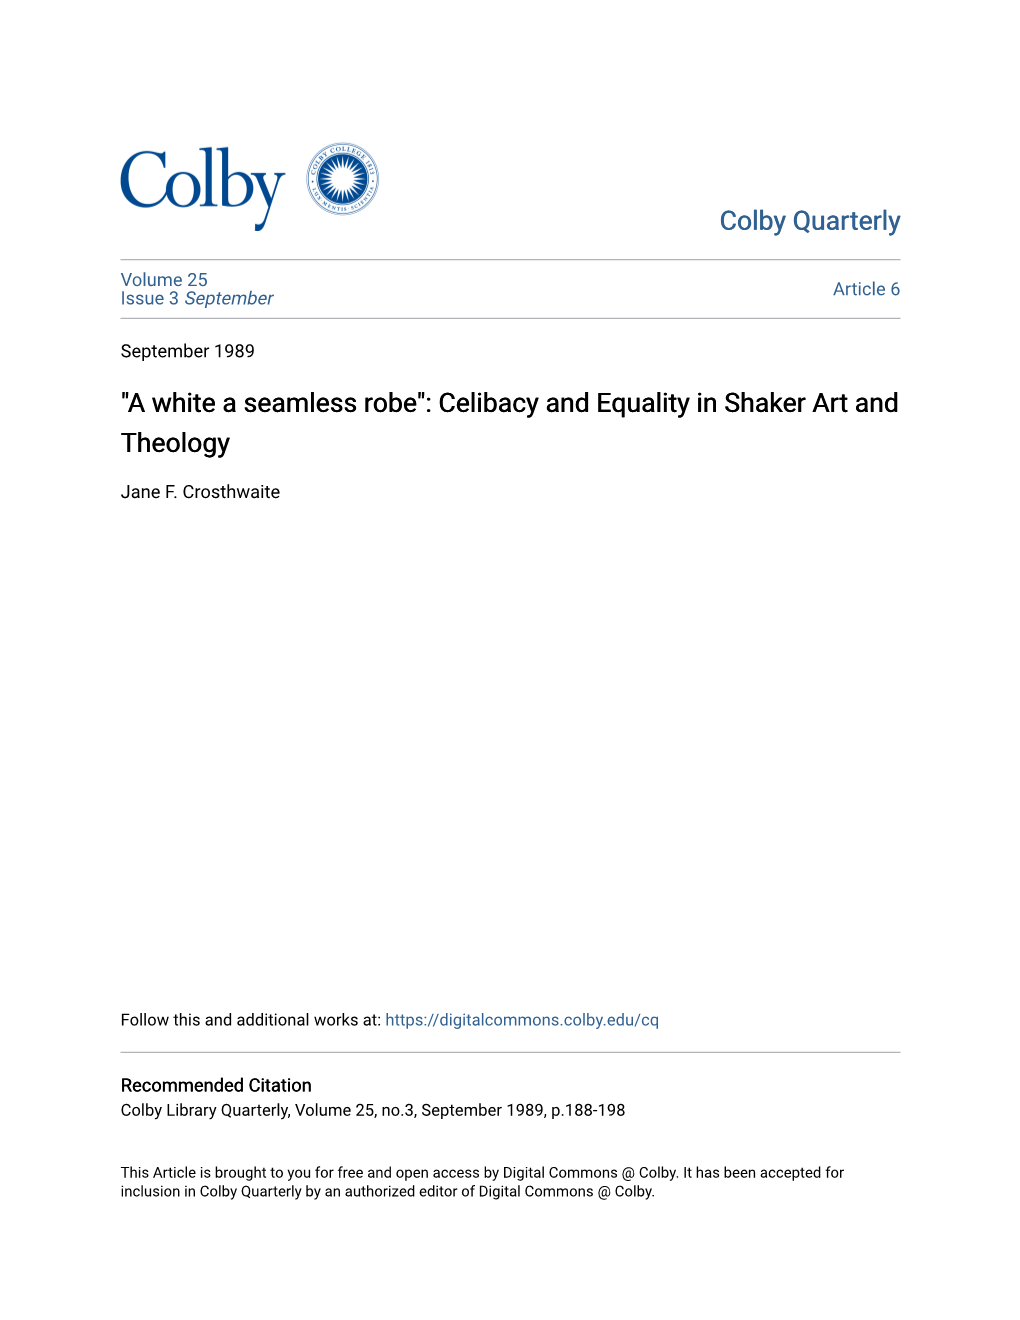 Celibacy and Equality in Shaker Art and Theology